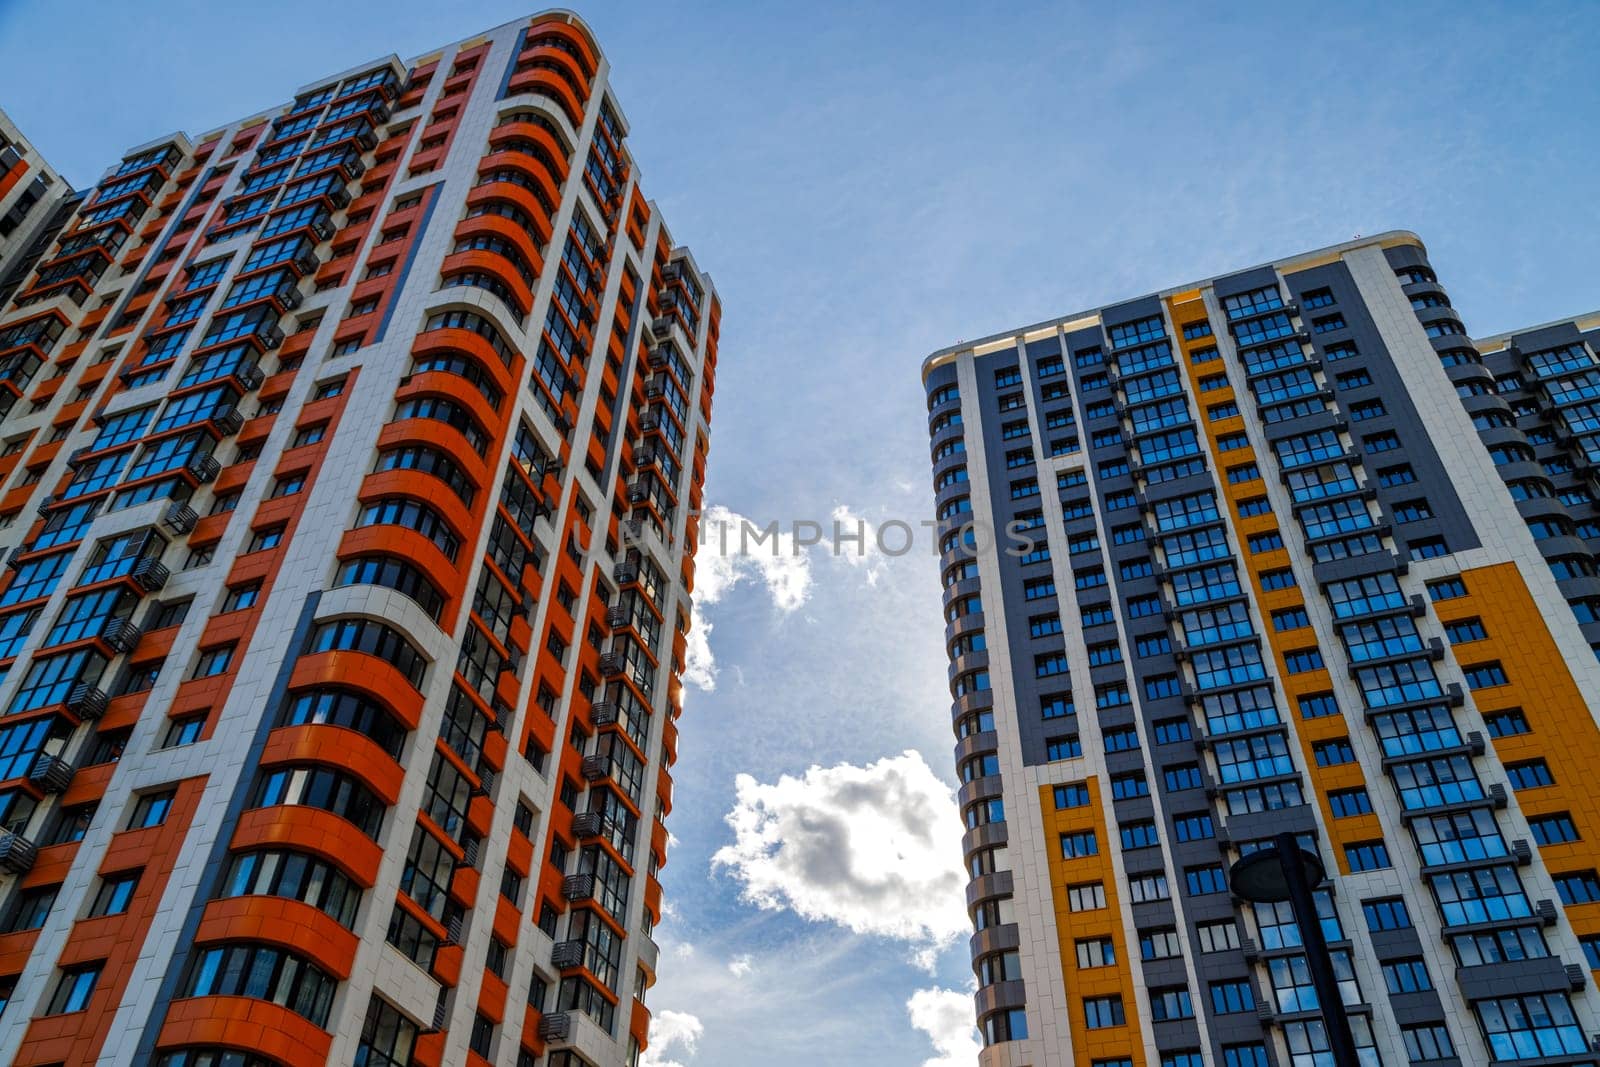 freshly built high rise apartment buildings on blue sky background with white clouds, low angle view